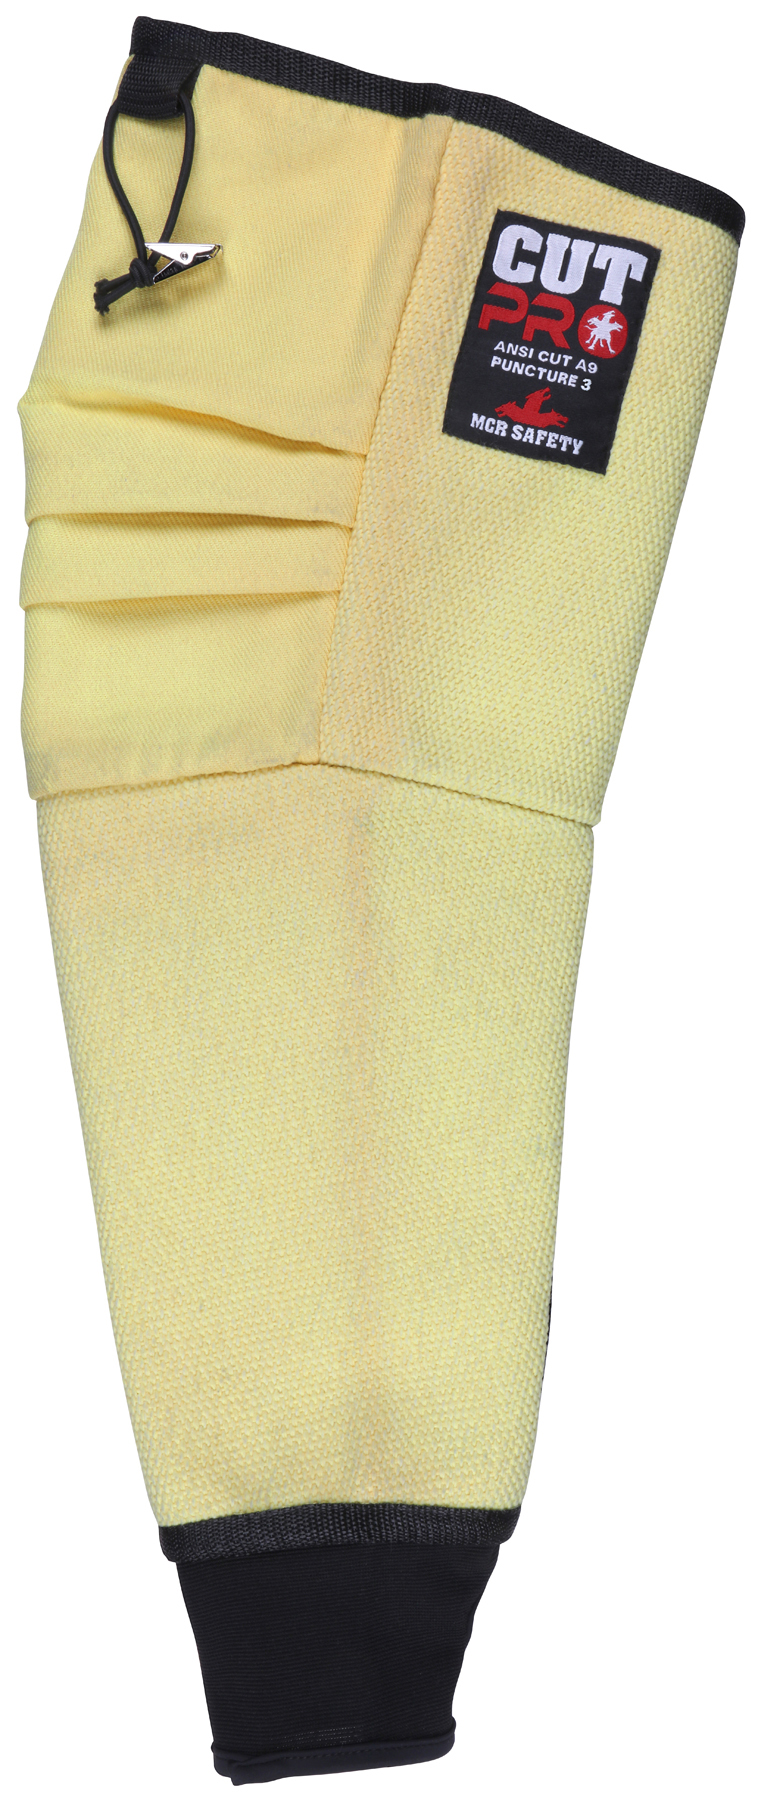 New Woven DuPont Kevlar with Cut Level A9 Protection Sleeve -- Occupational  Health & Safety